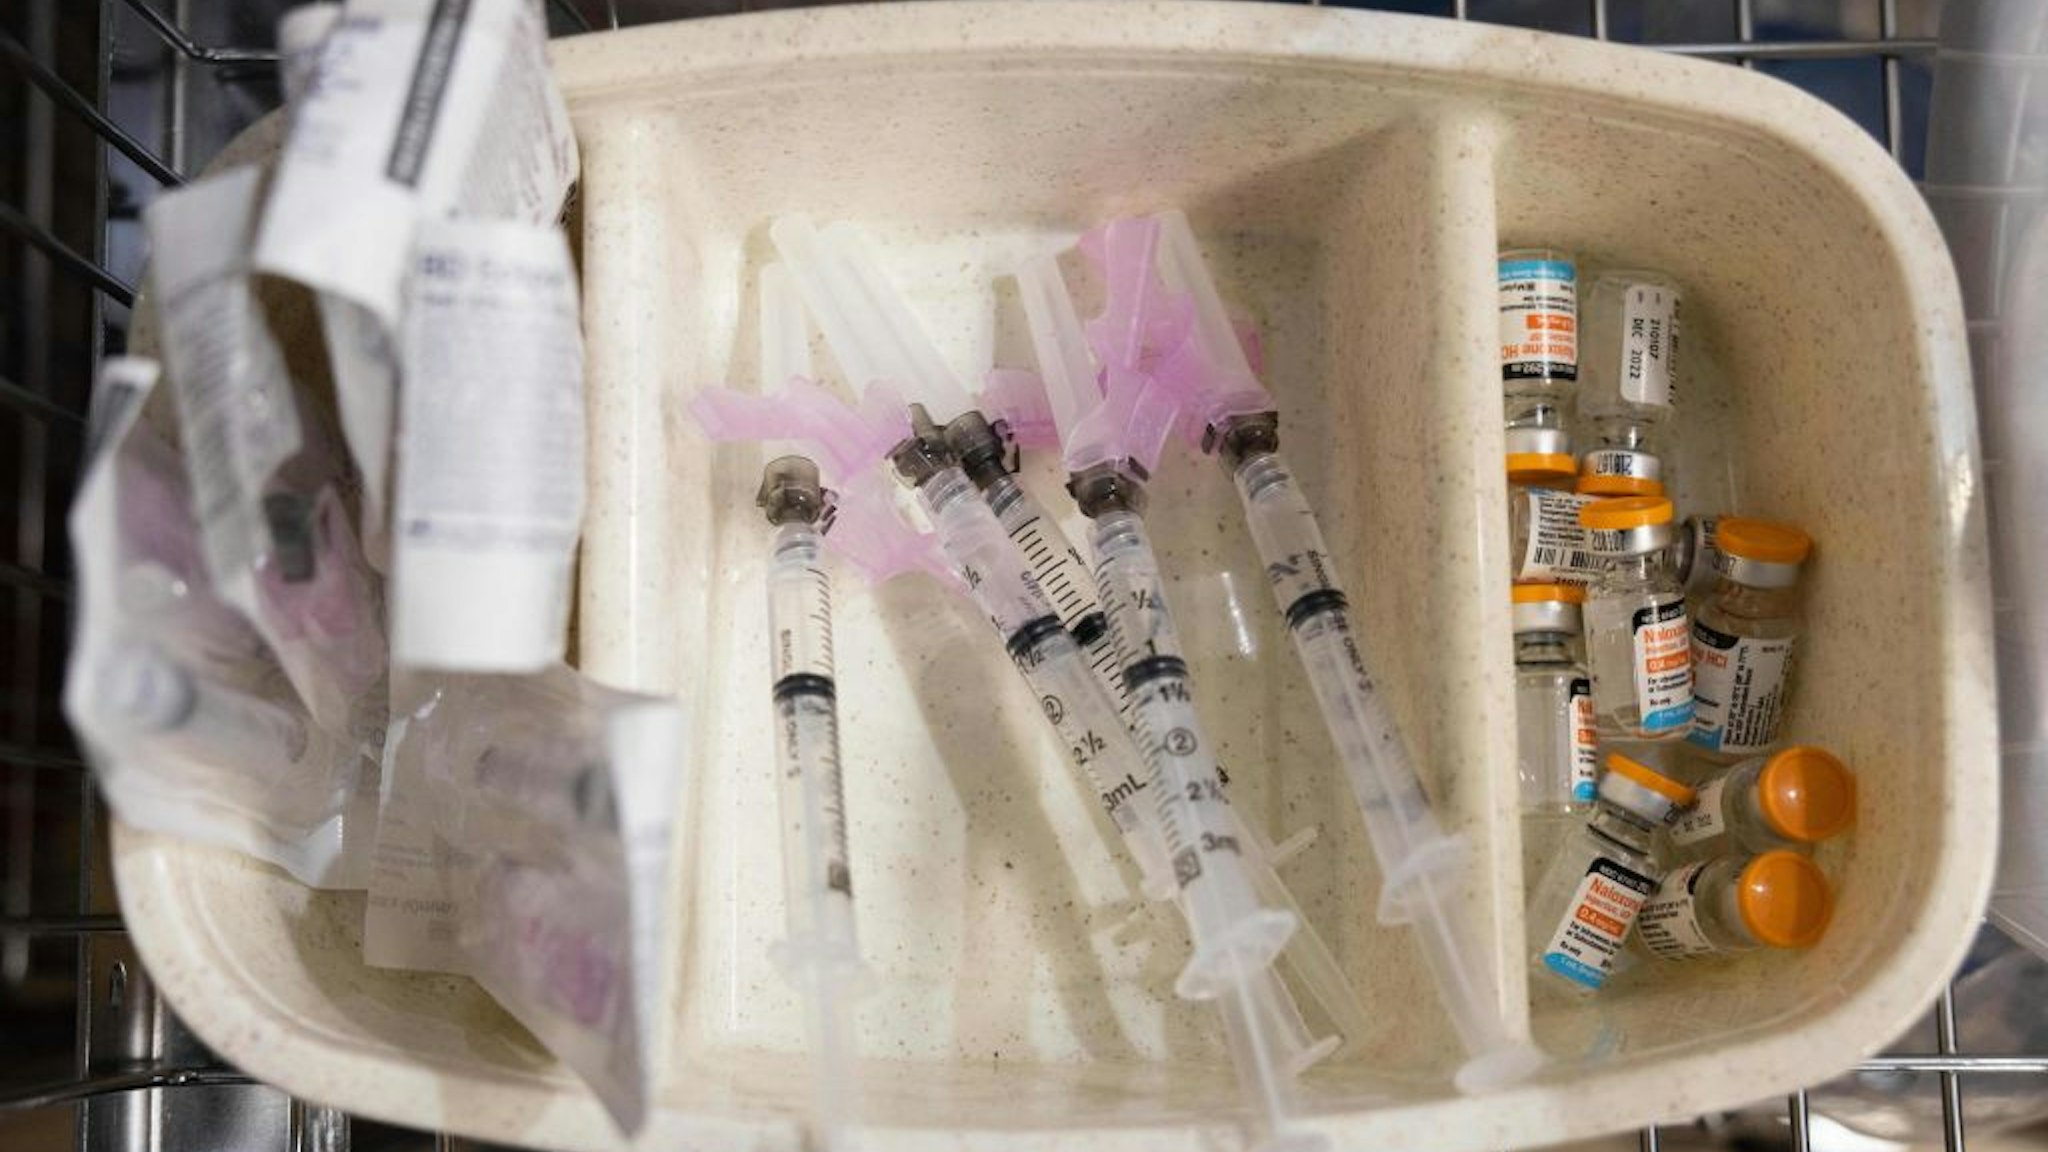 In this November 30, 2021 photo, syringes and vials of Naloxone are shown during the media tour of the supervised drug injection site OnPoint, in New York.